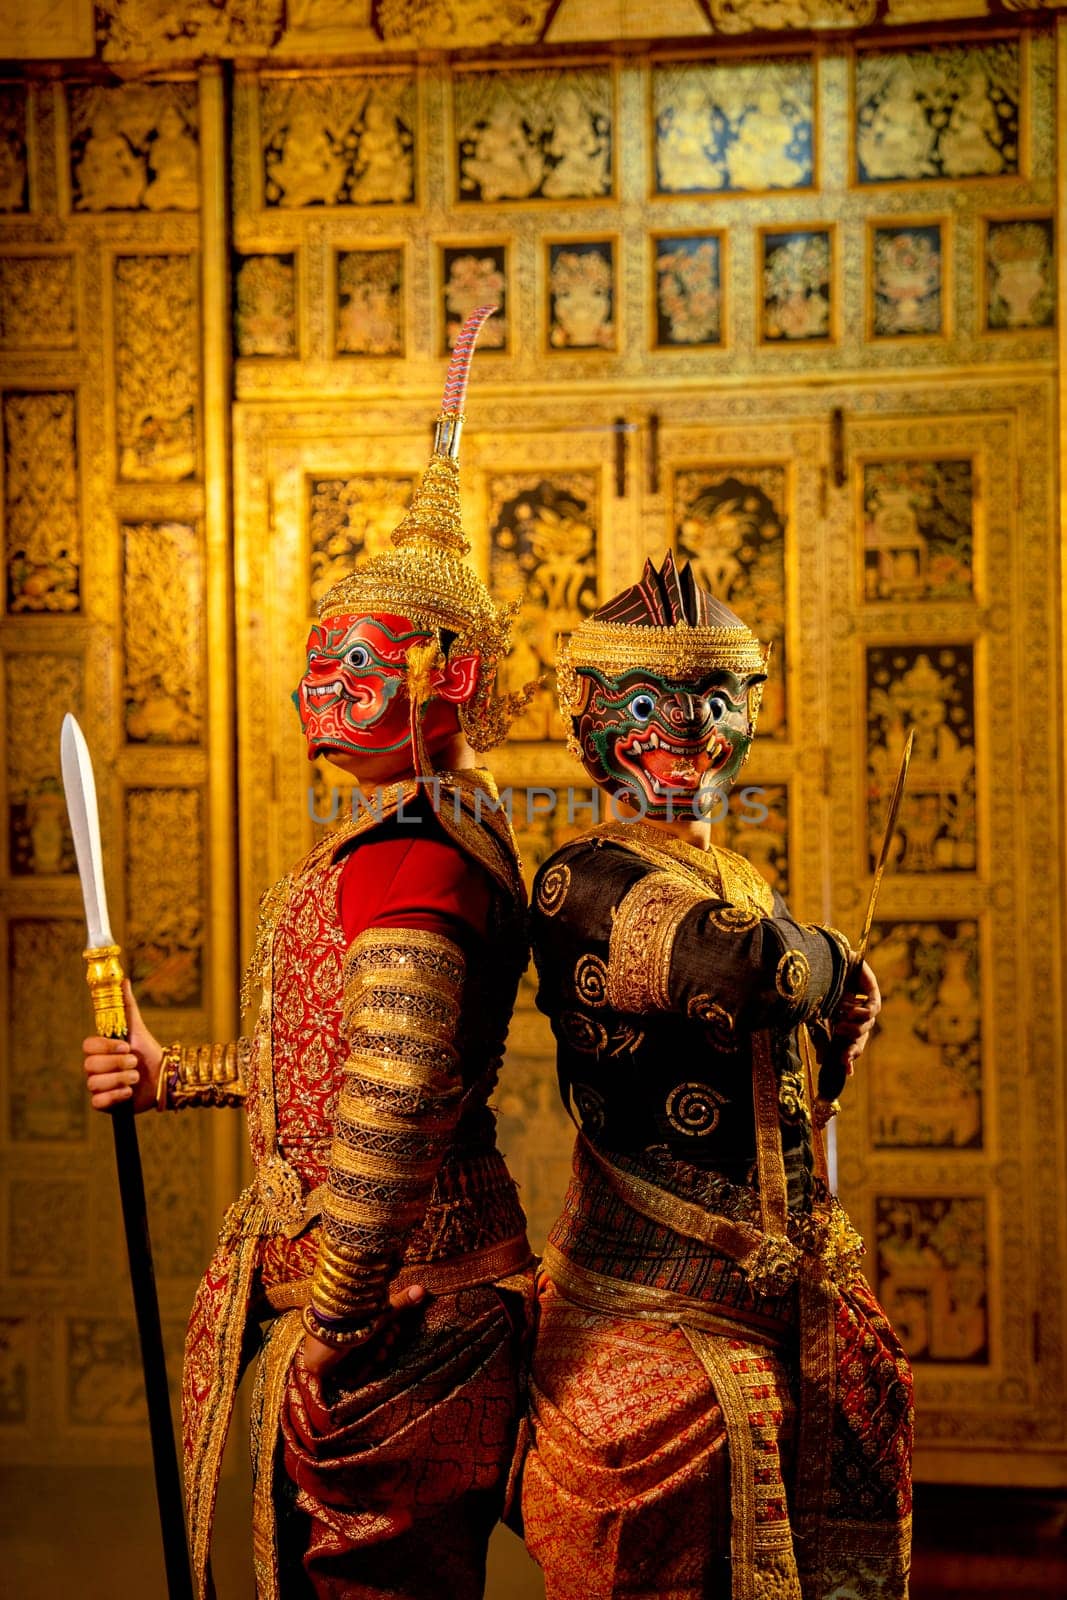 Khon or traditional Thai classic masked from the Ramakien with Red giant stand beside black monkey and Thai paintings background.